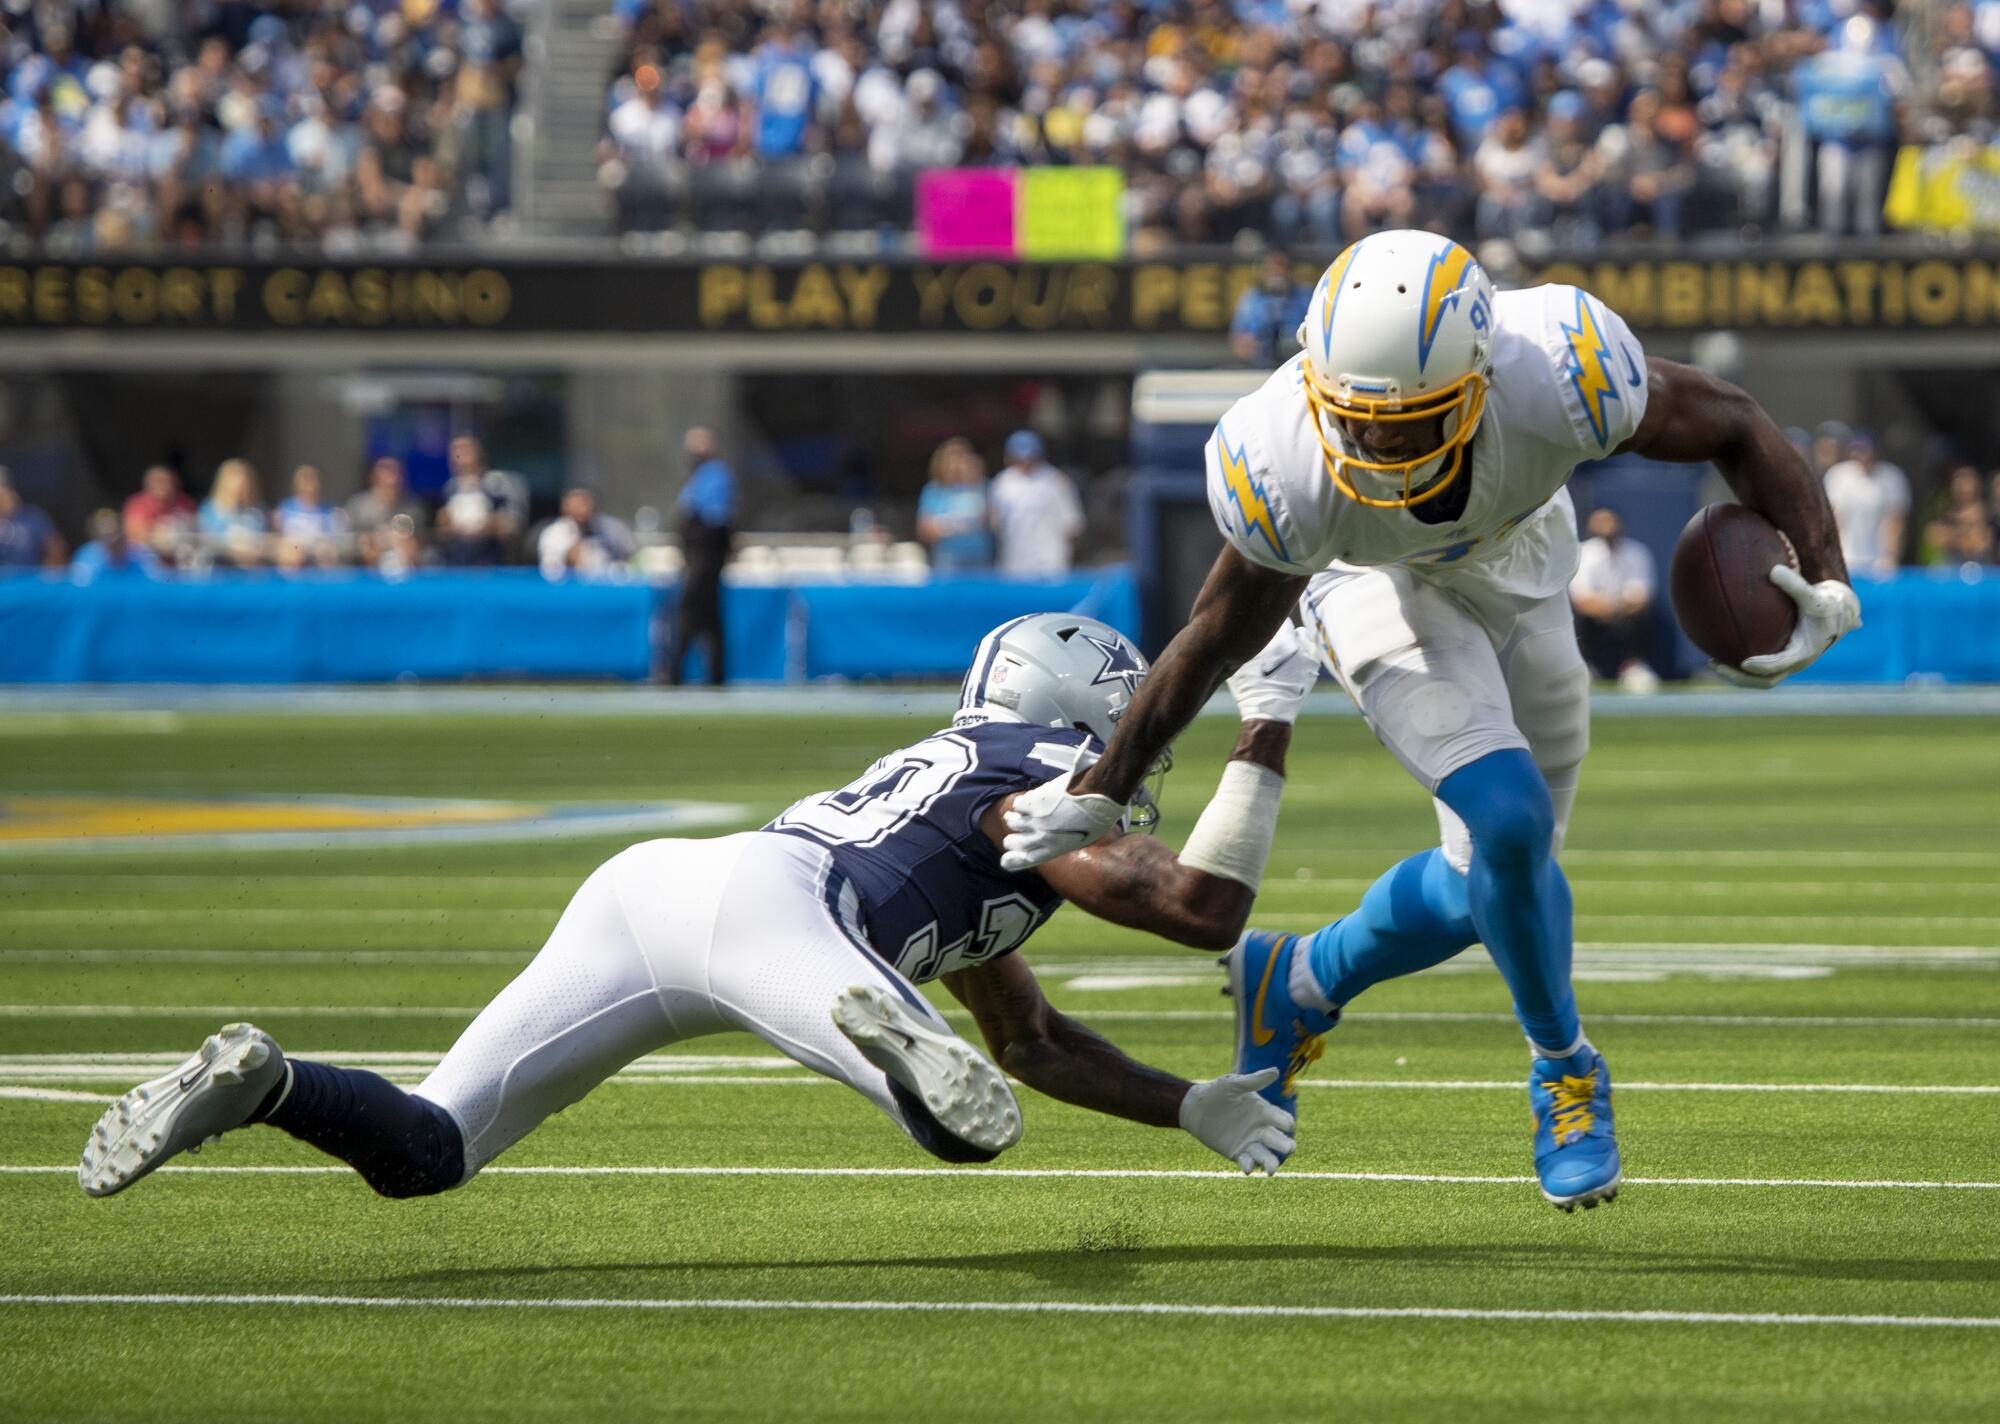 Chargers wide receiver Mike Williams avoids a tackle by Dallas Cowboys cornerback Anthony Brown.